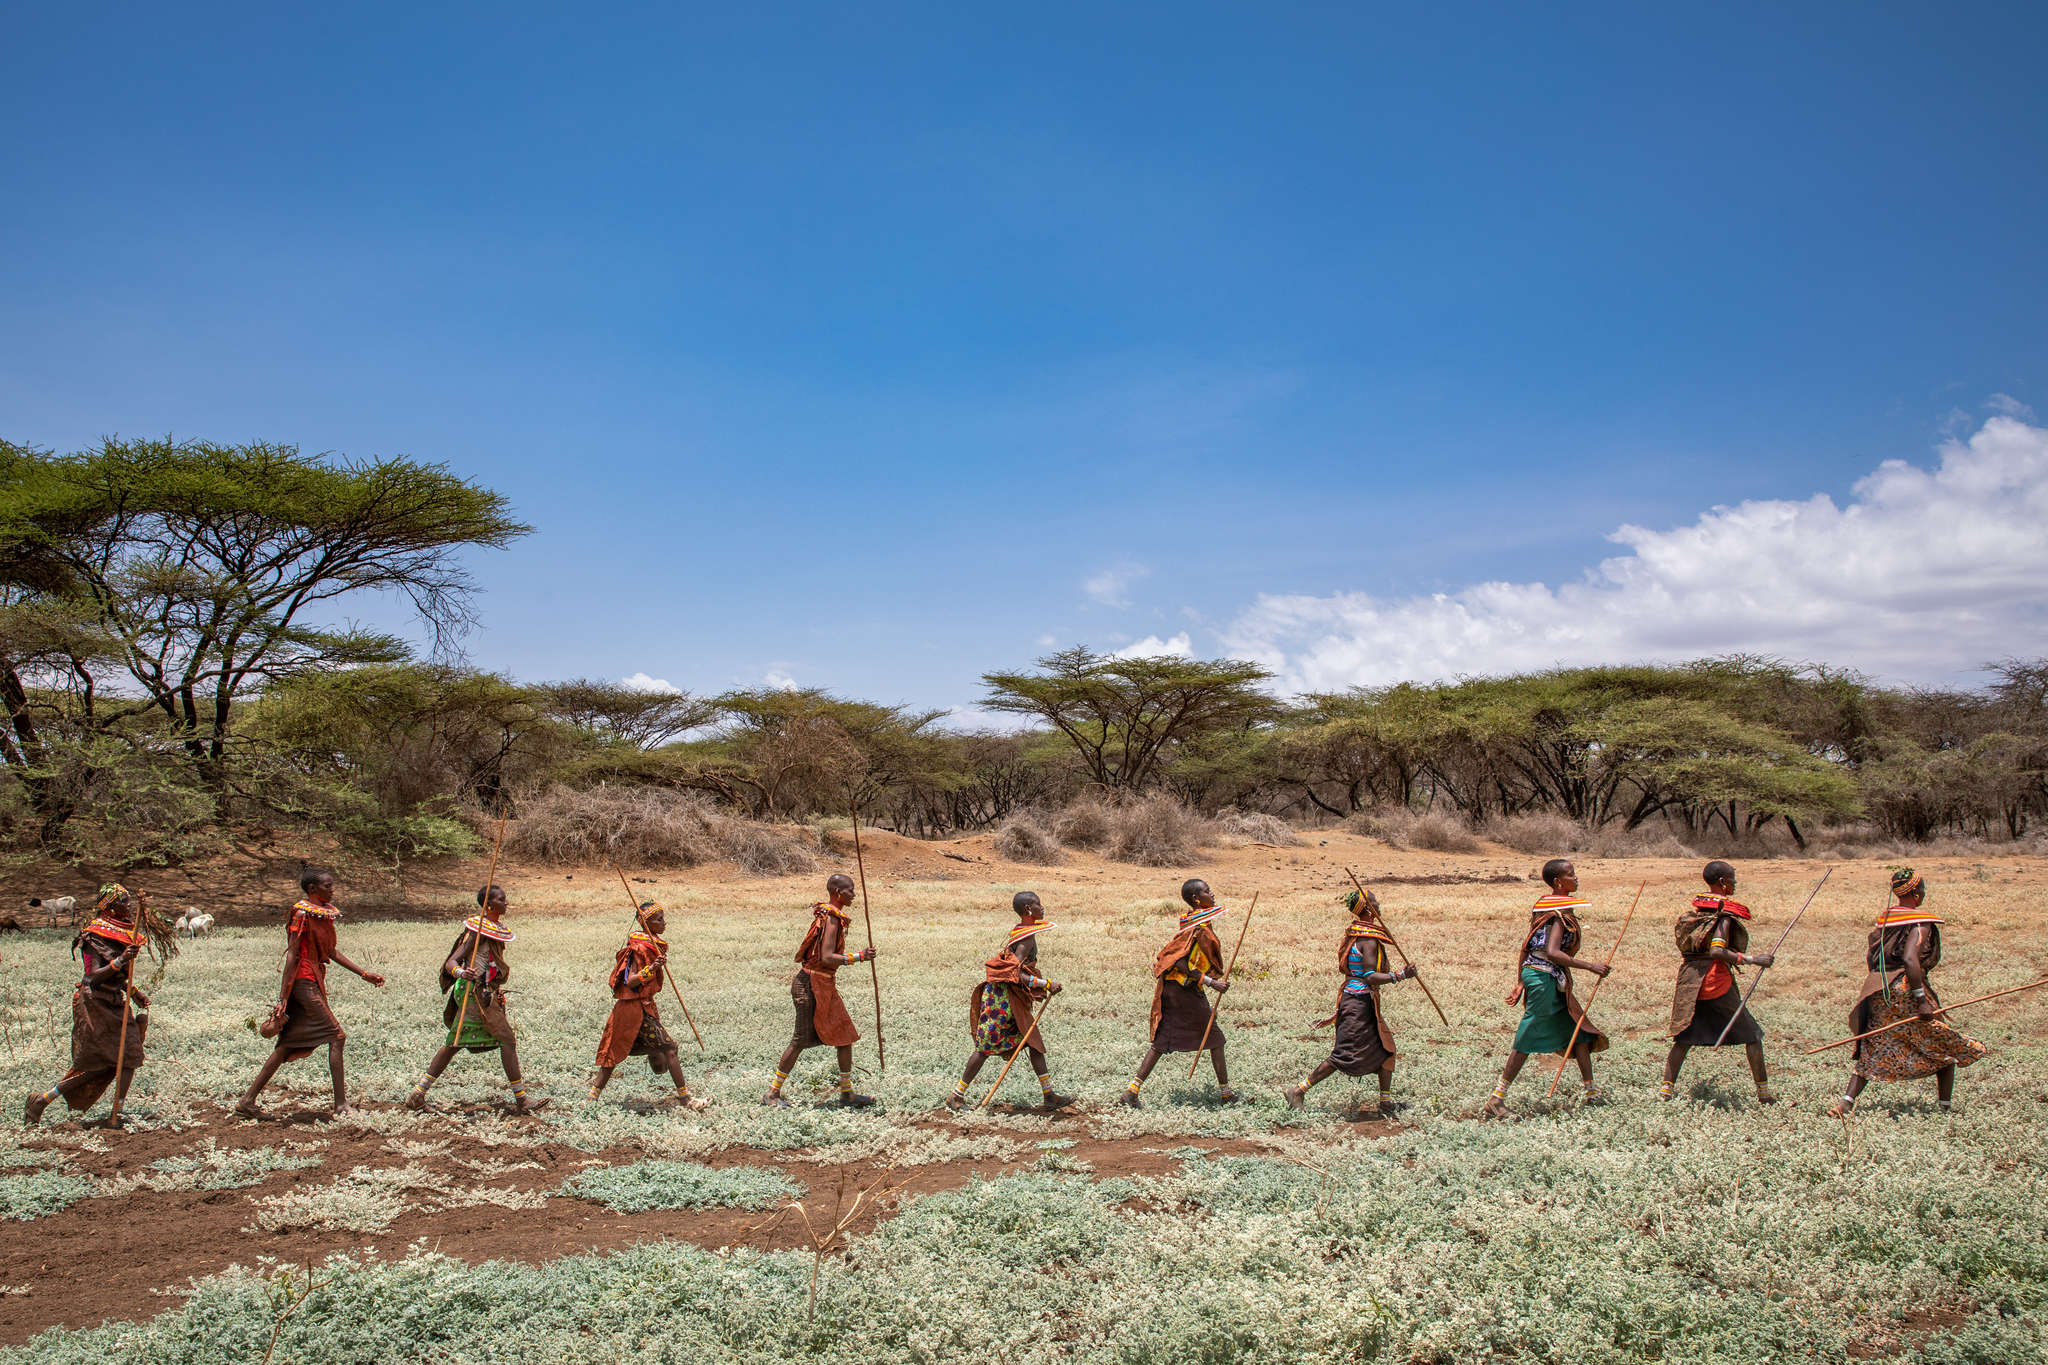 Women from six villages around ngilai, kenya gather for a daily ceremony asking the gods to provide rain.